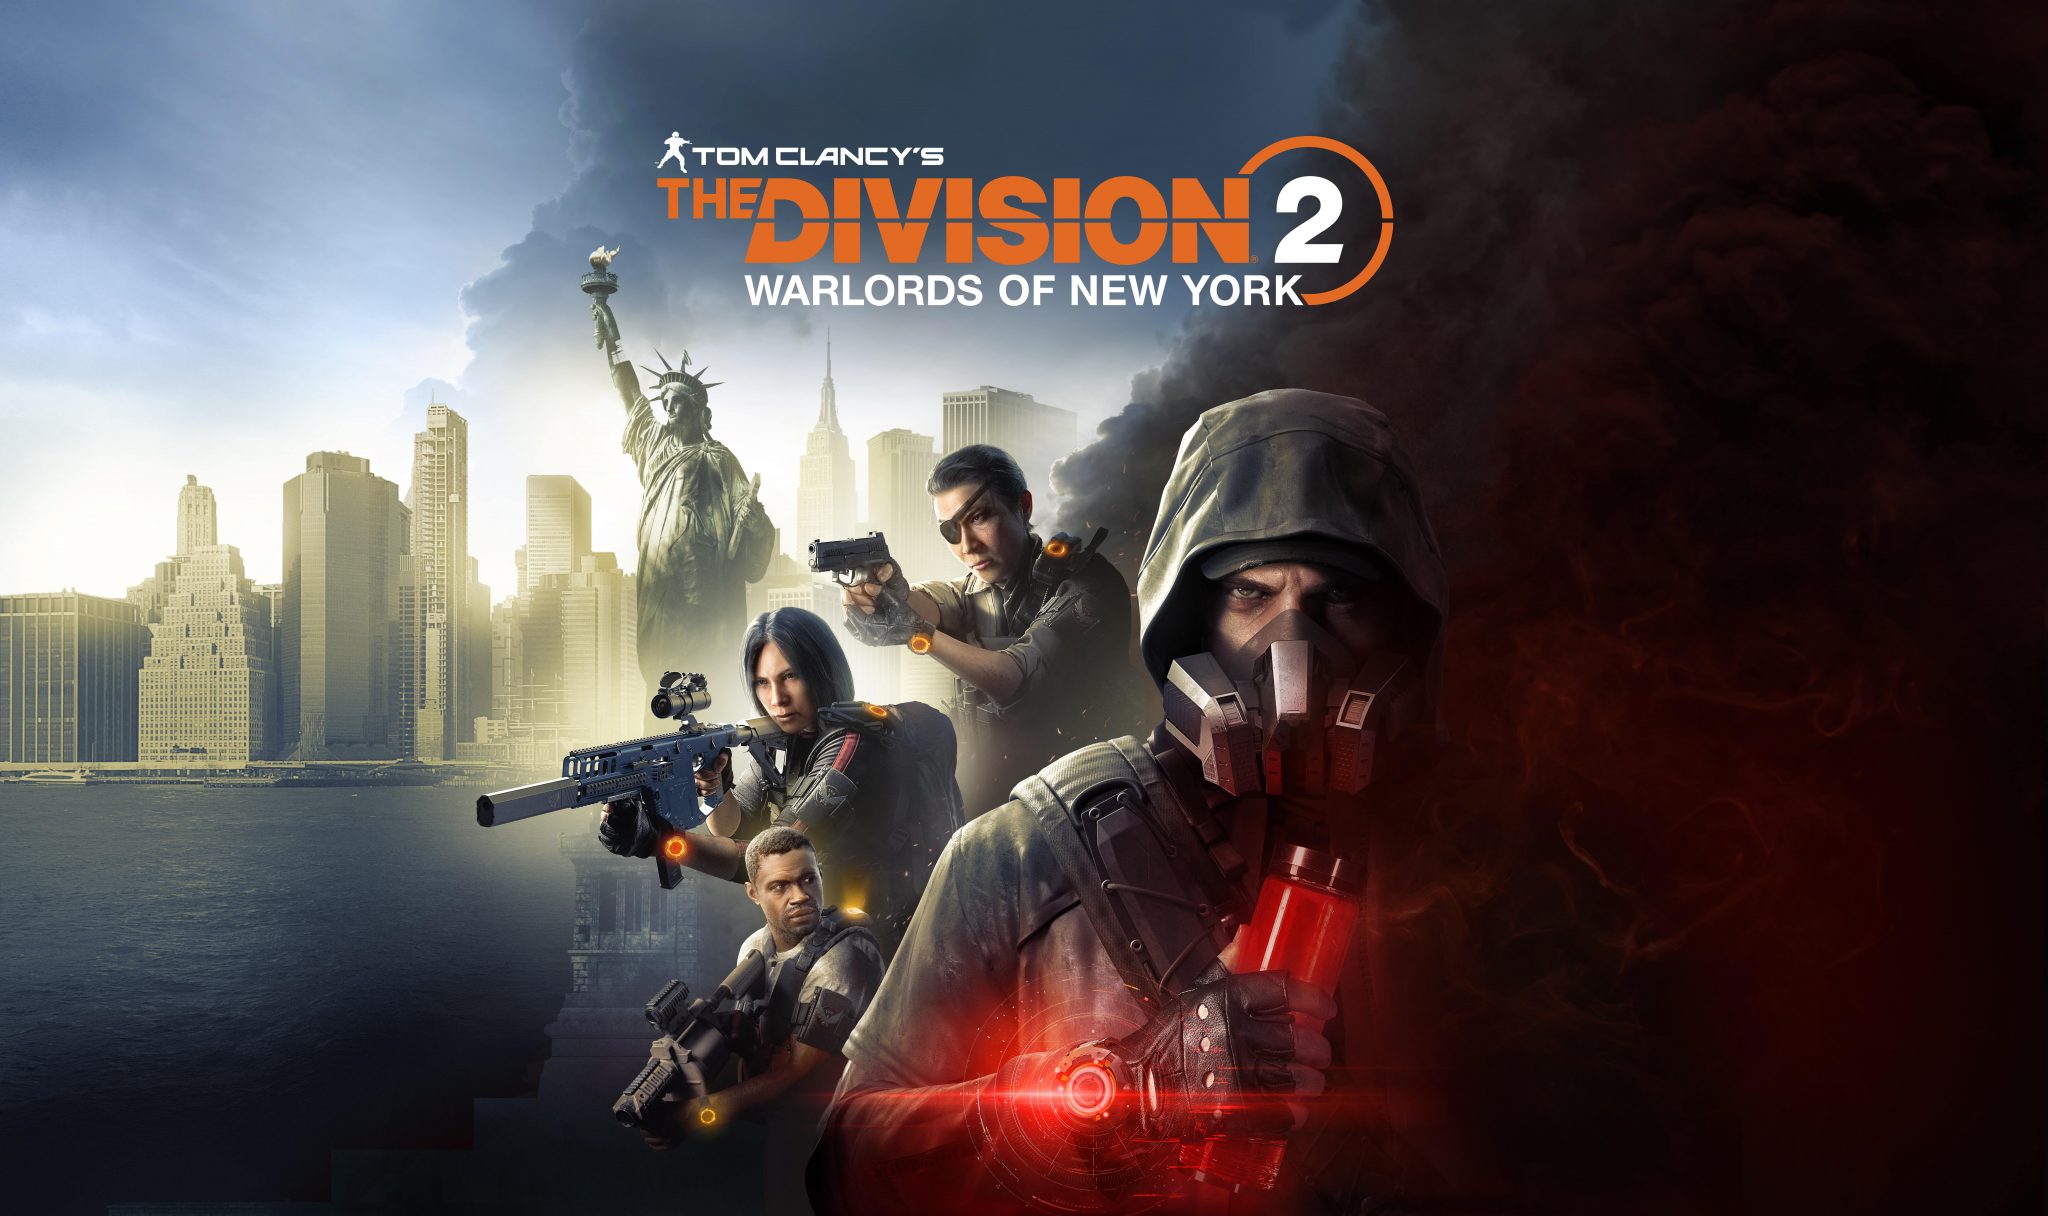 The division 2 : warlords of new york